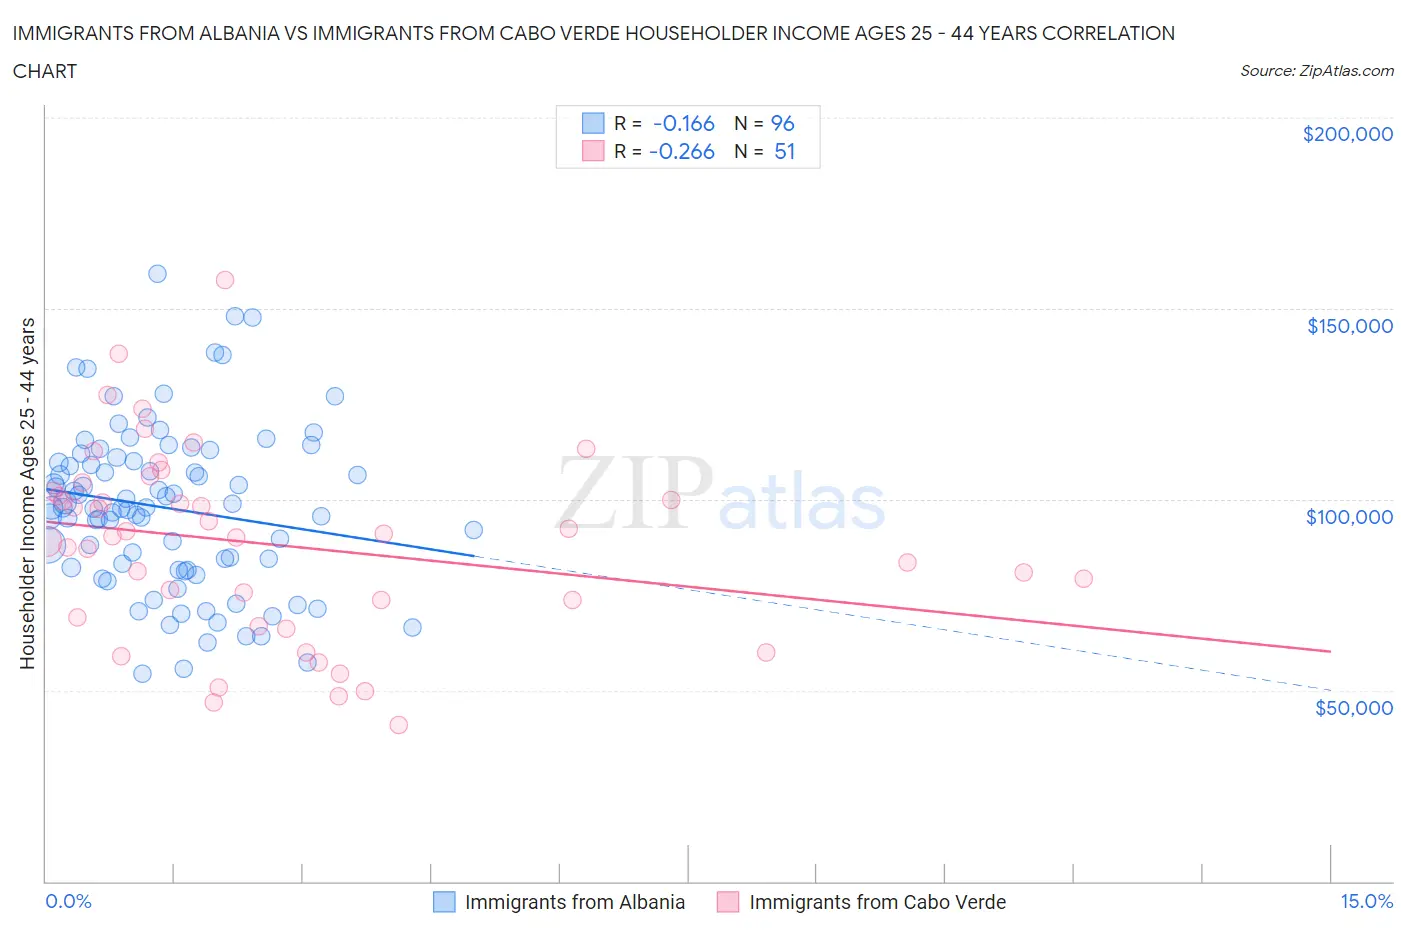 Immigrants from Albania vs Immigrants from Cabo Verde Householder Income Ages 25 - 44 years